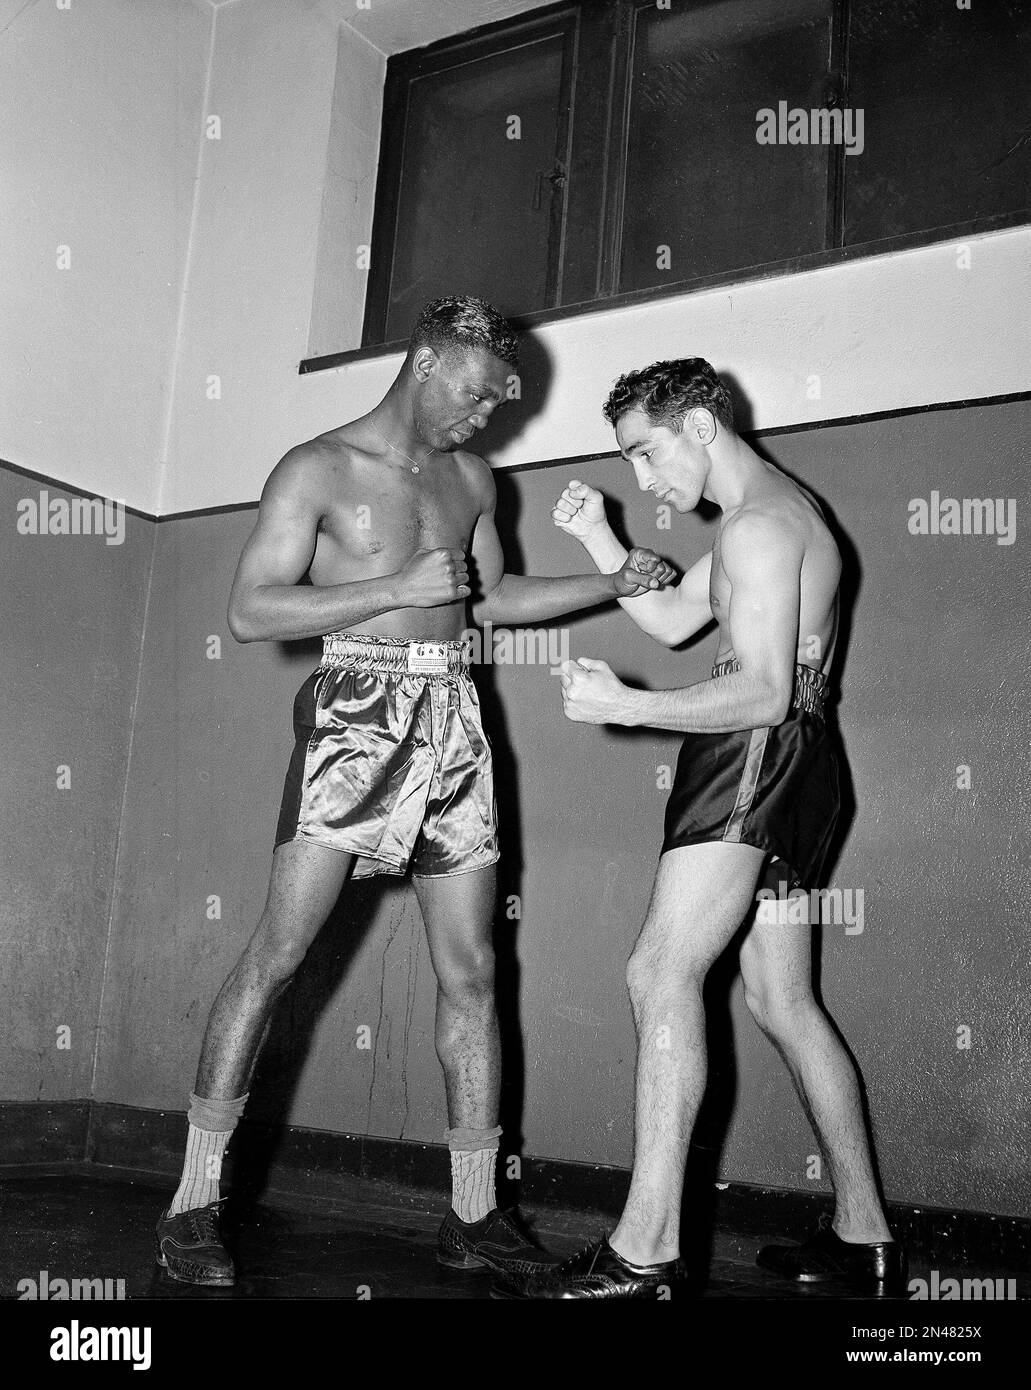 https://c8.alamy.com/comp/2N4825X/chalky-wright-left-of-los-angeles-and-willie-pep-of-hartford-conn-square-off-after-they-weighed-in-at-the-new-york-athletic-commission-offices-in-new-york-sept-29-1944-the-meet-in-madison-square-garden-later-today-in-a-15-round-battle-for-the-featherweight-title-as-recognized-by-the-new-york-athletic-commission-pep-won-the-title-from-wright-in-the-same-ring-in-nov-1942-ap-photojohn-lindsay-2N4825X.jpg